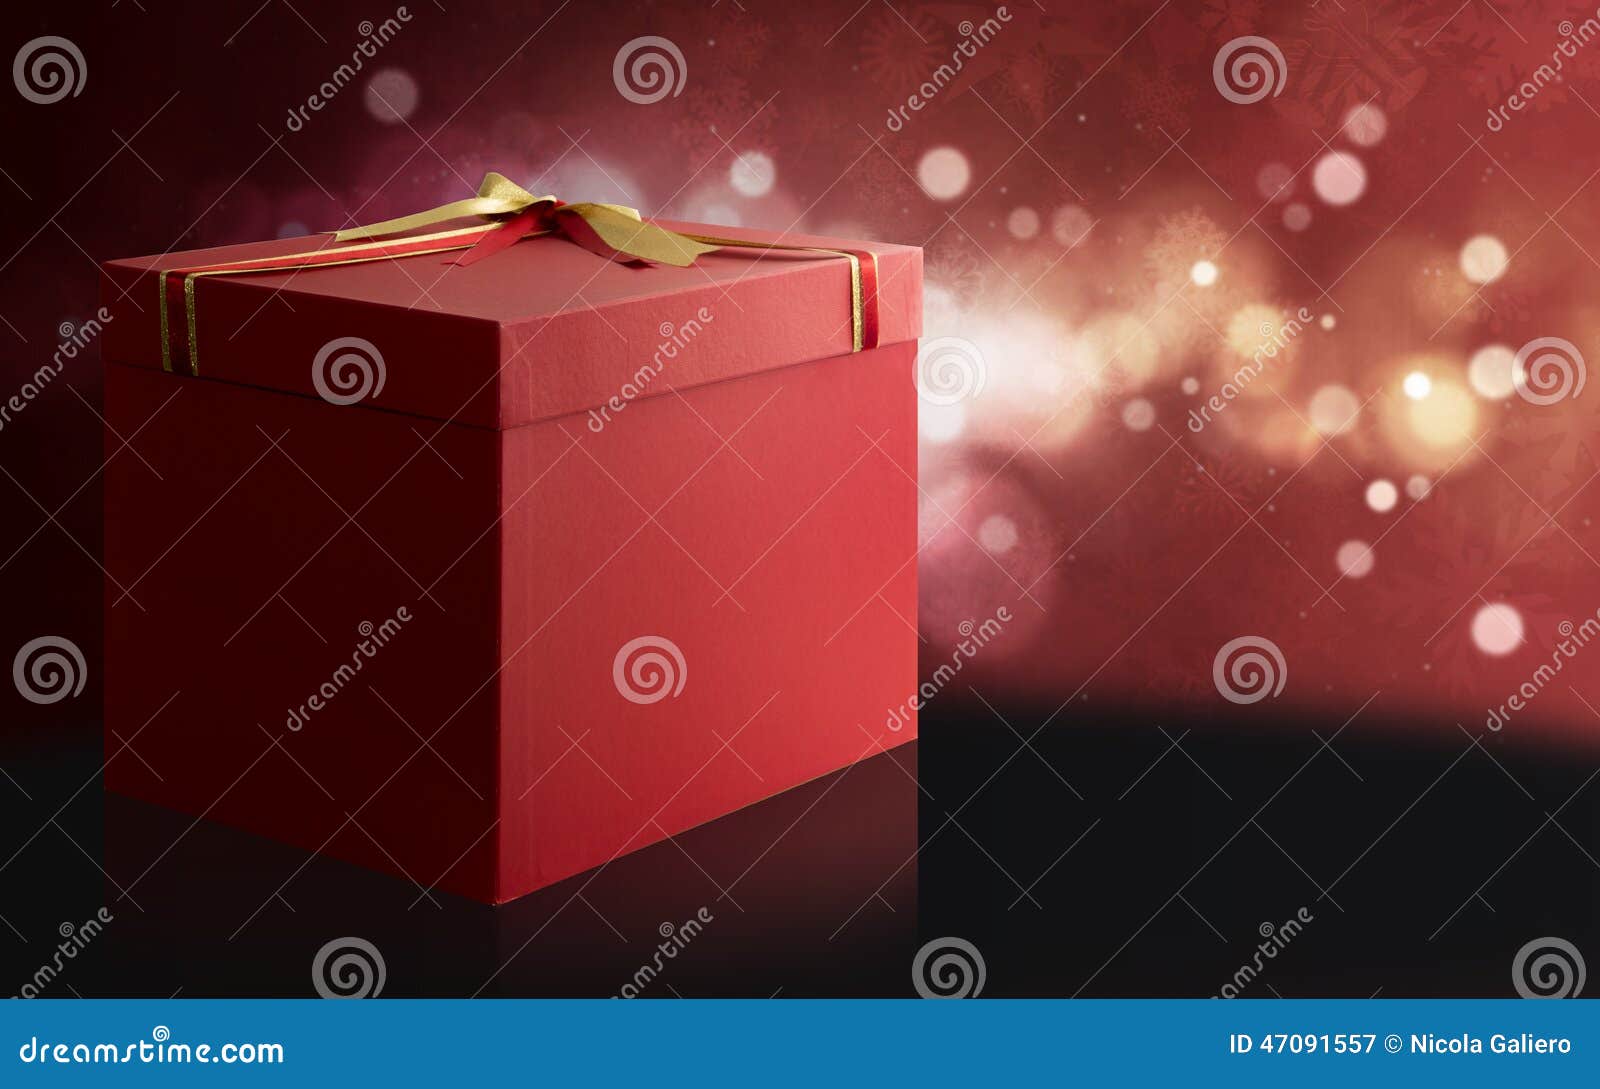 gift box over a red and black christmas background.